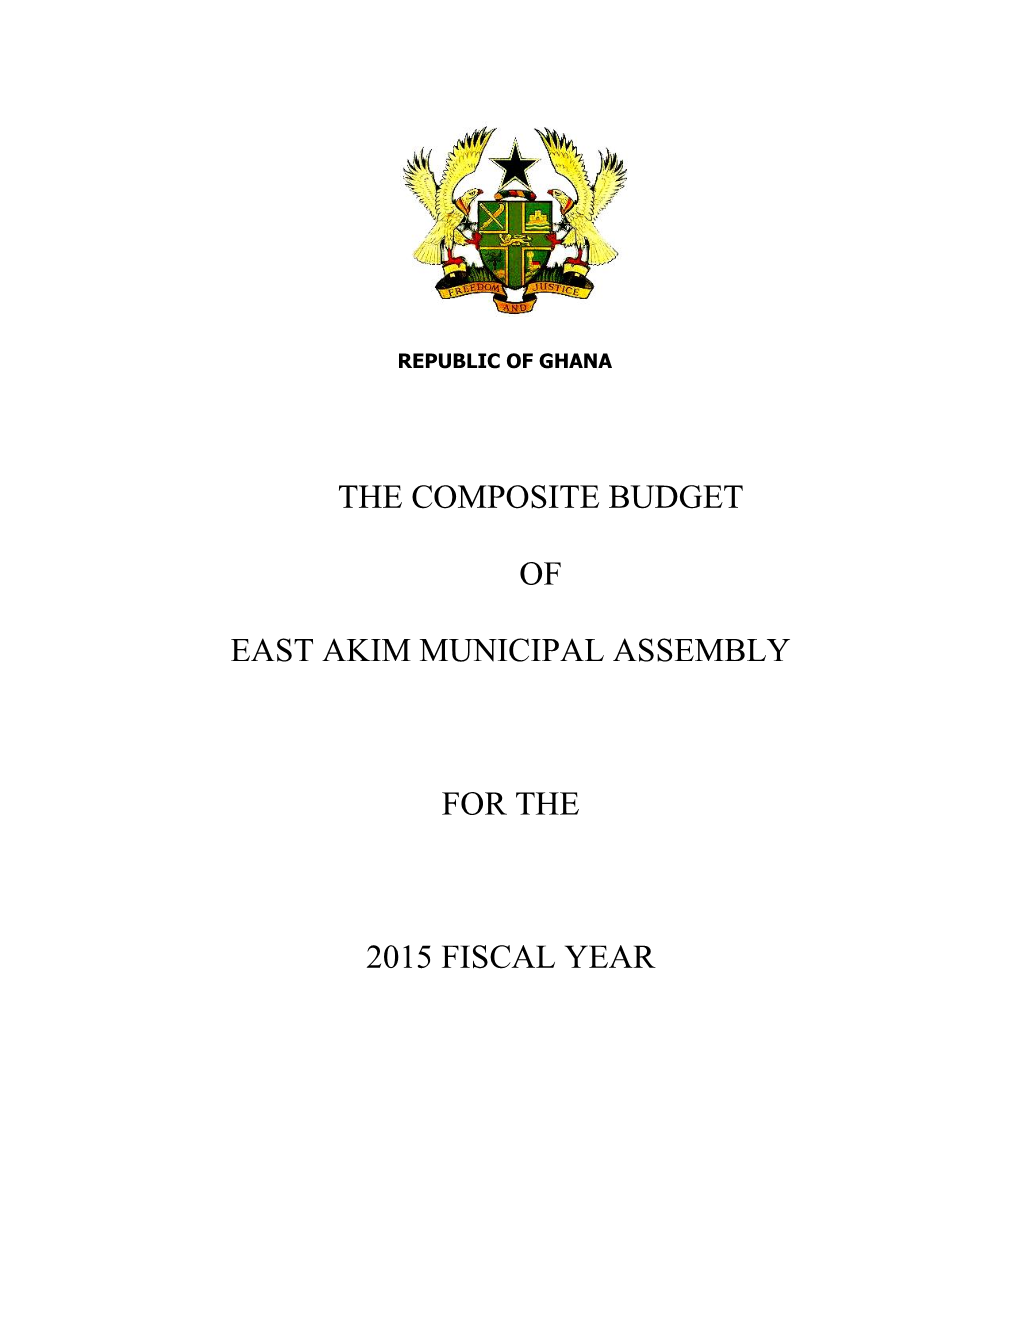 The Composite Budget of East Akim Municipal Assembly for the 2015 Fiscal Year